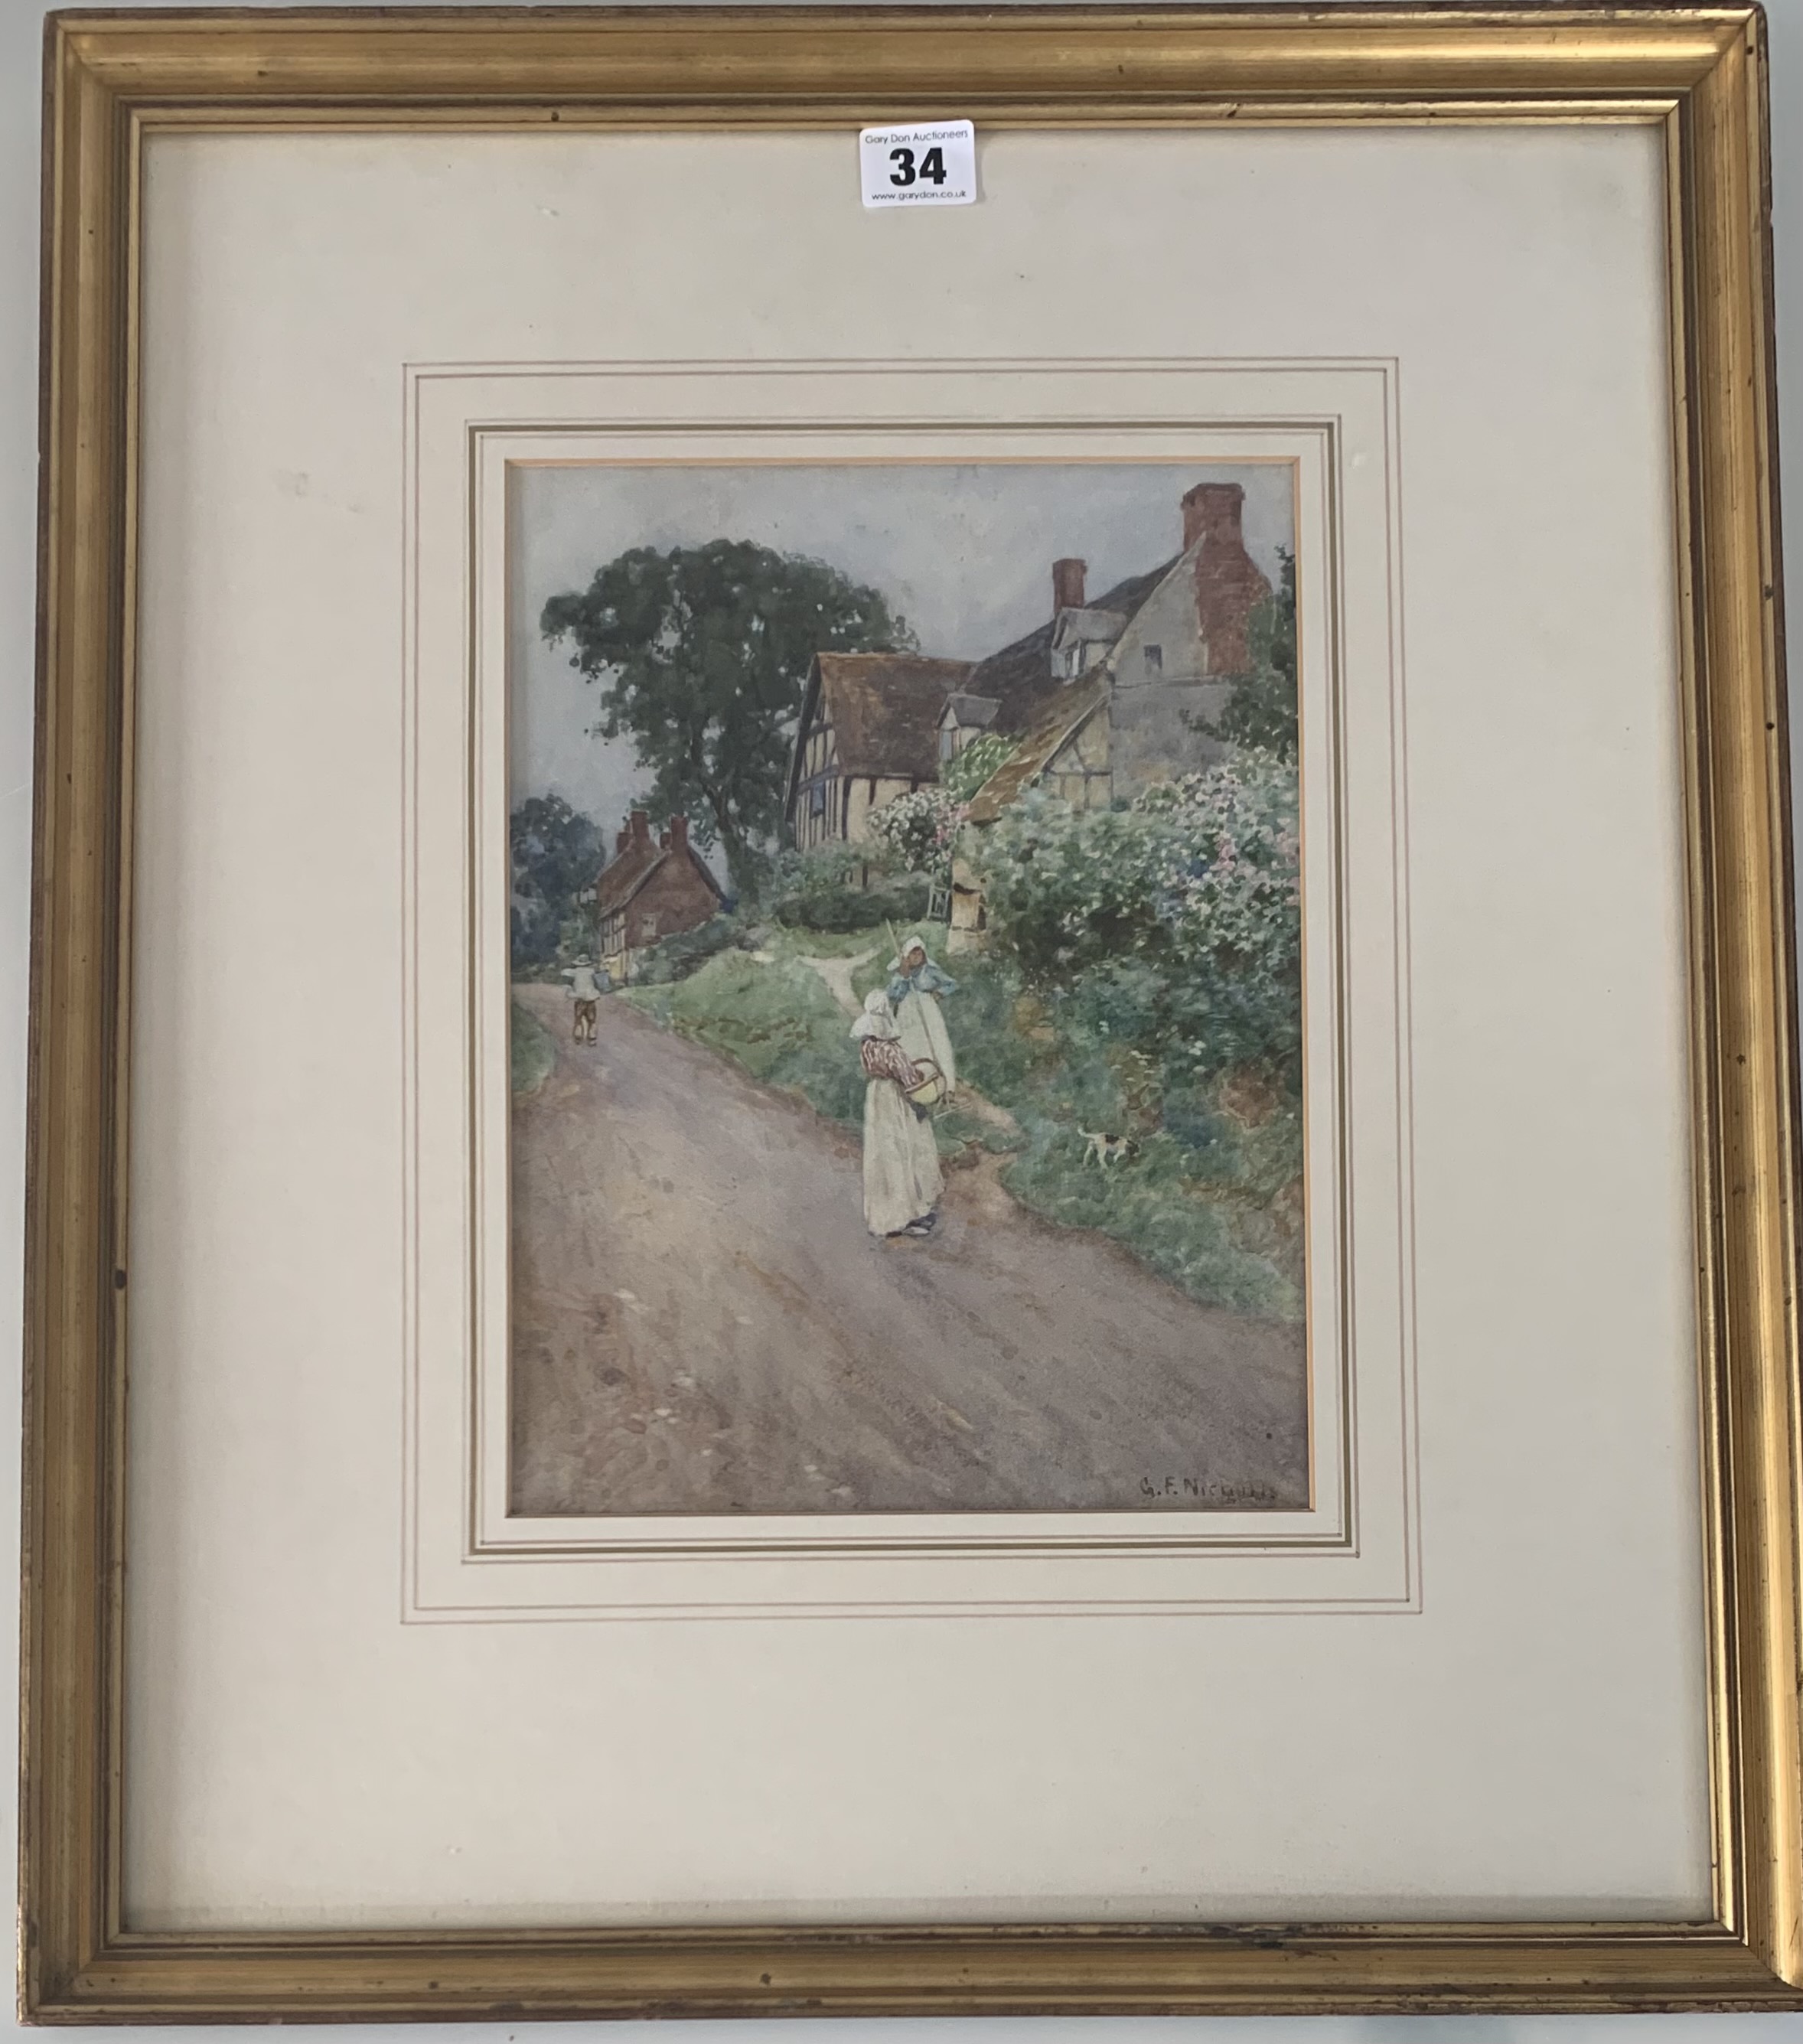 Watercolour “The Old Manor House, Cropthorne, Worcestershire” by G.F. Nicholls. Image 8.5” x 11.